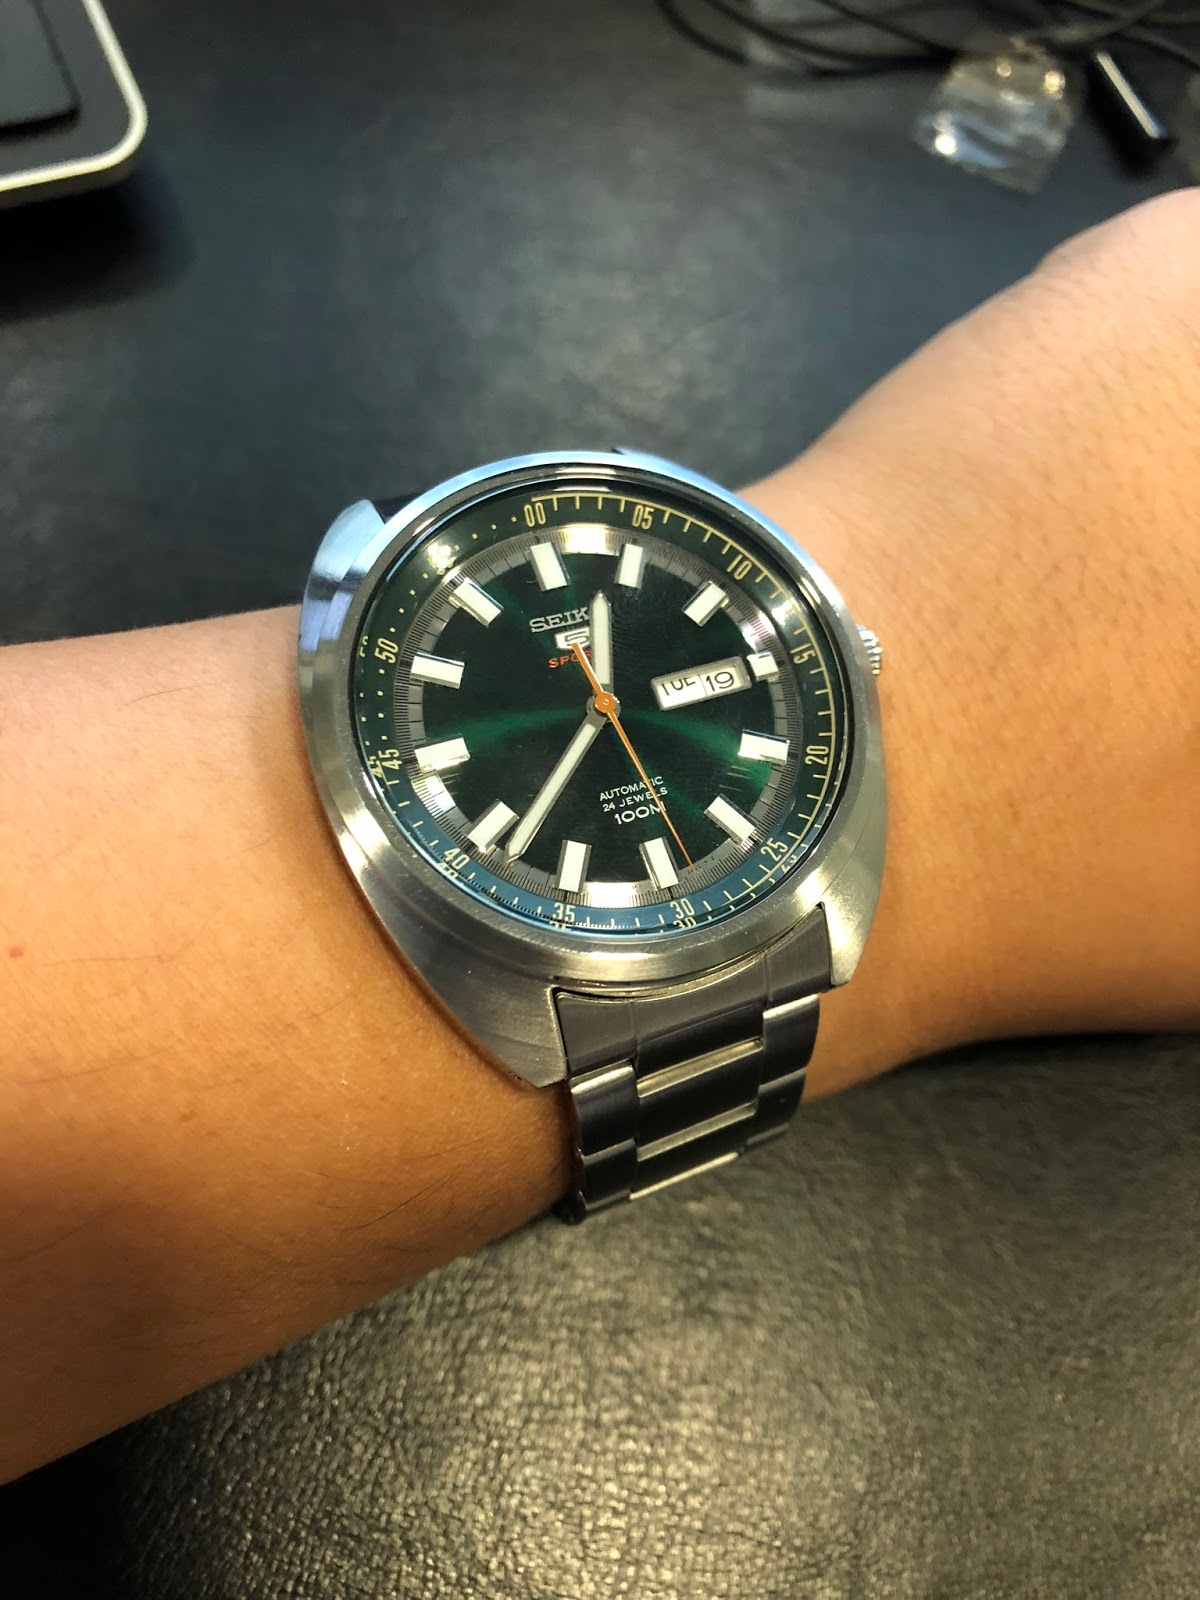 My Eastern Watch Collection Seiko 5 Sports Stainless Steel Green Dial Turtle Srpb13k1 Clean Dial Without Clutter A Review Plus Video